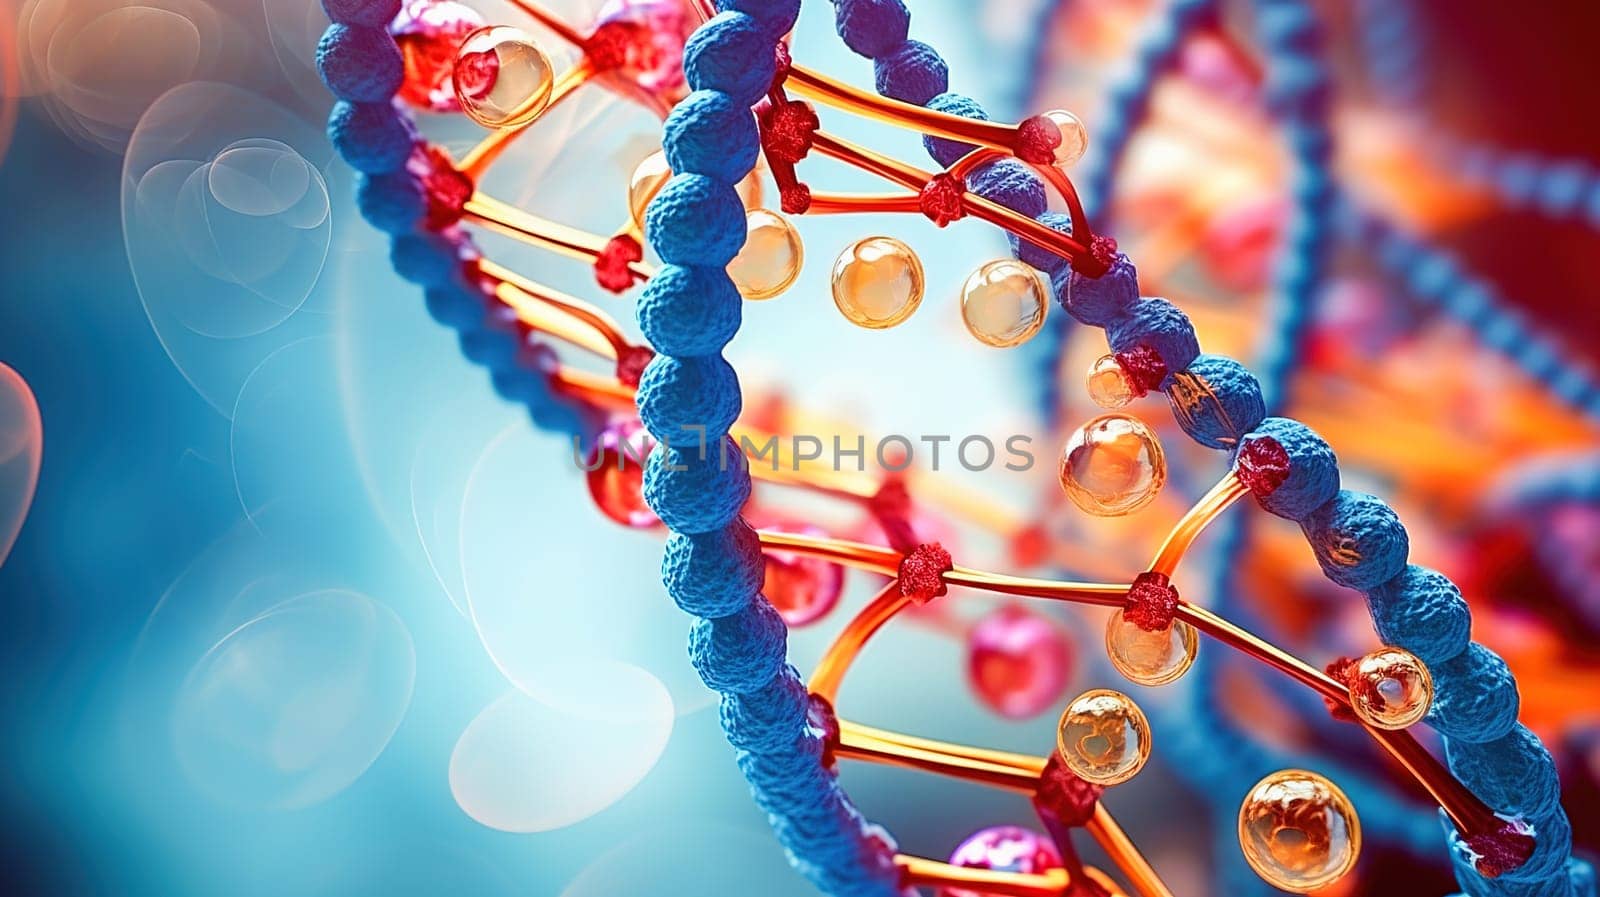 DNA helix, biotechnology and molecular engineering, scientific medicine and innovation concept. DNA gene editing using modern technologies. by Yurich32